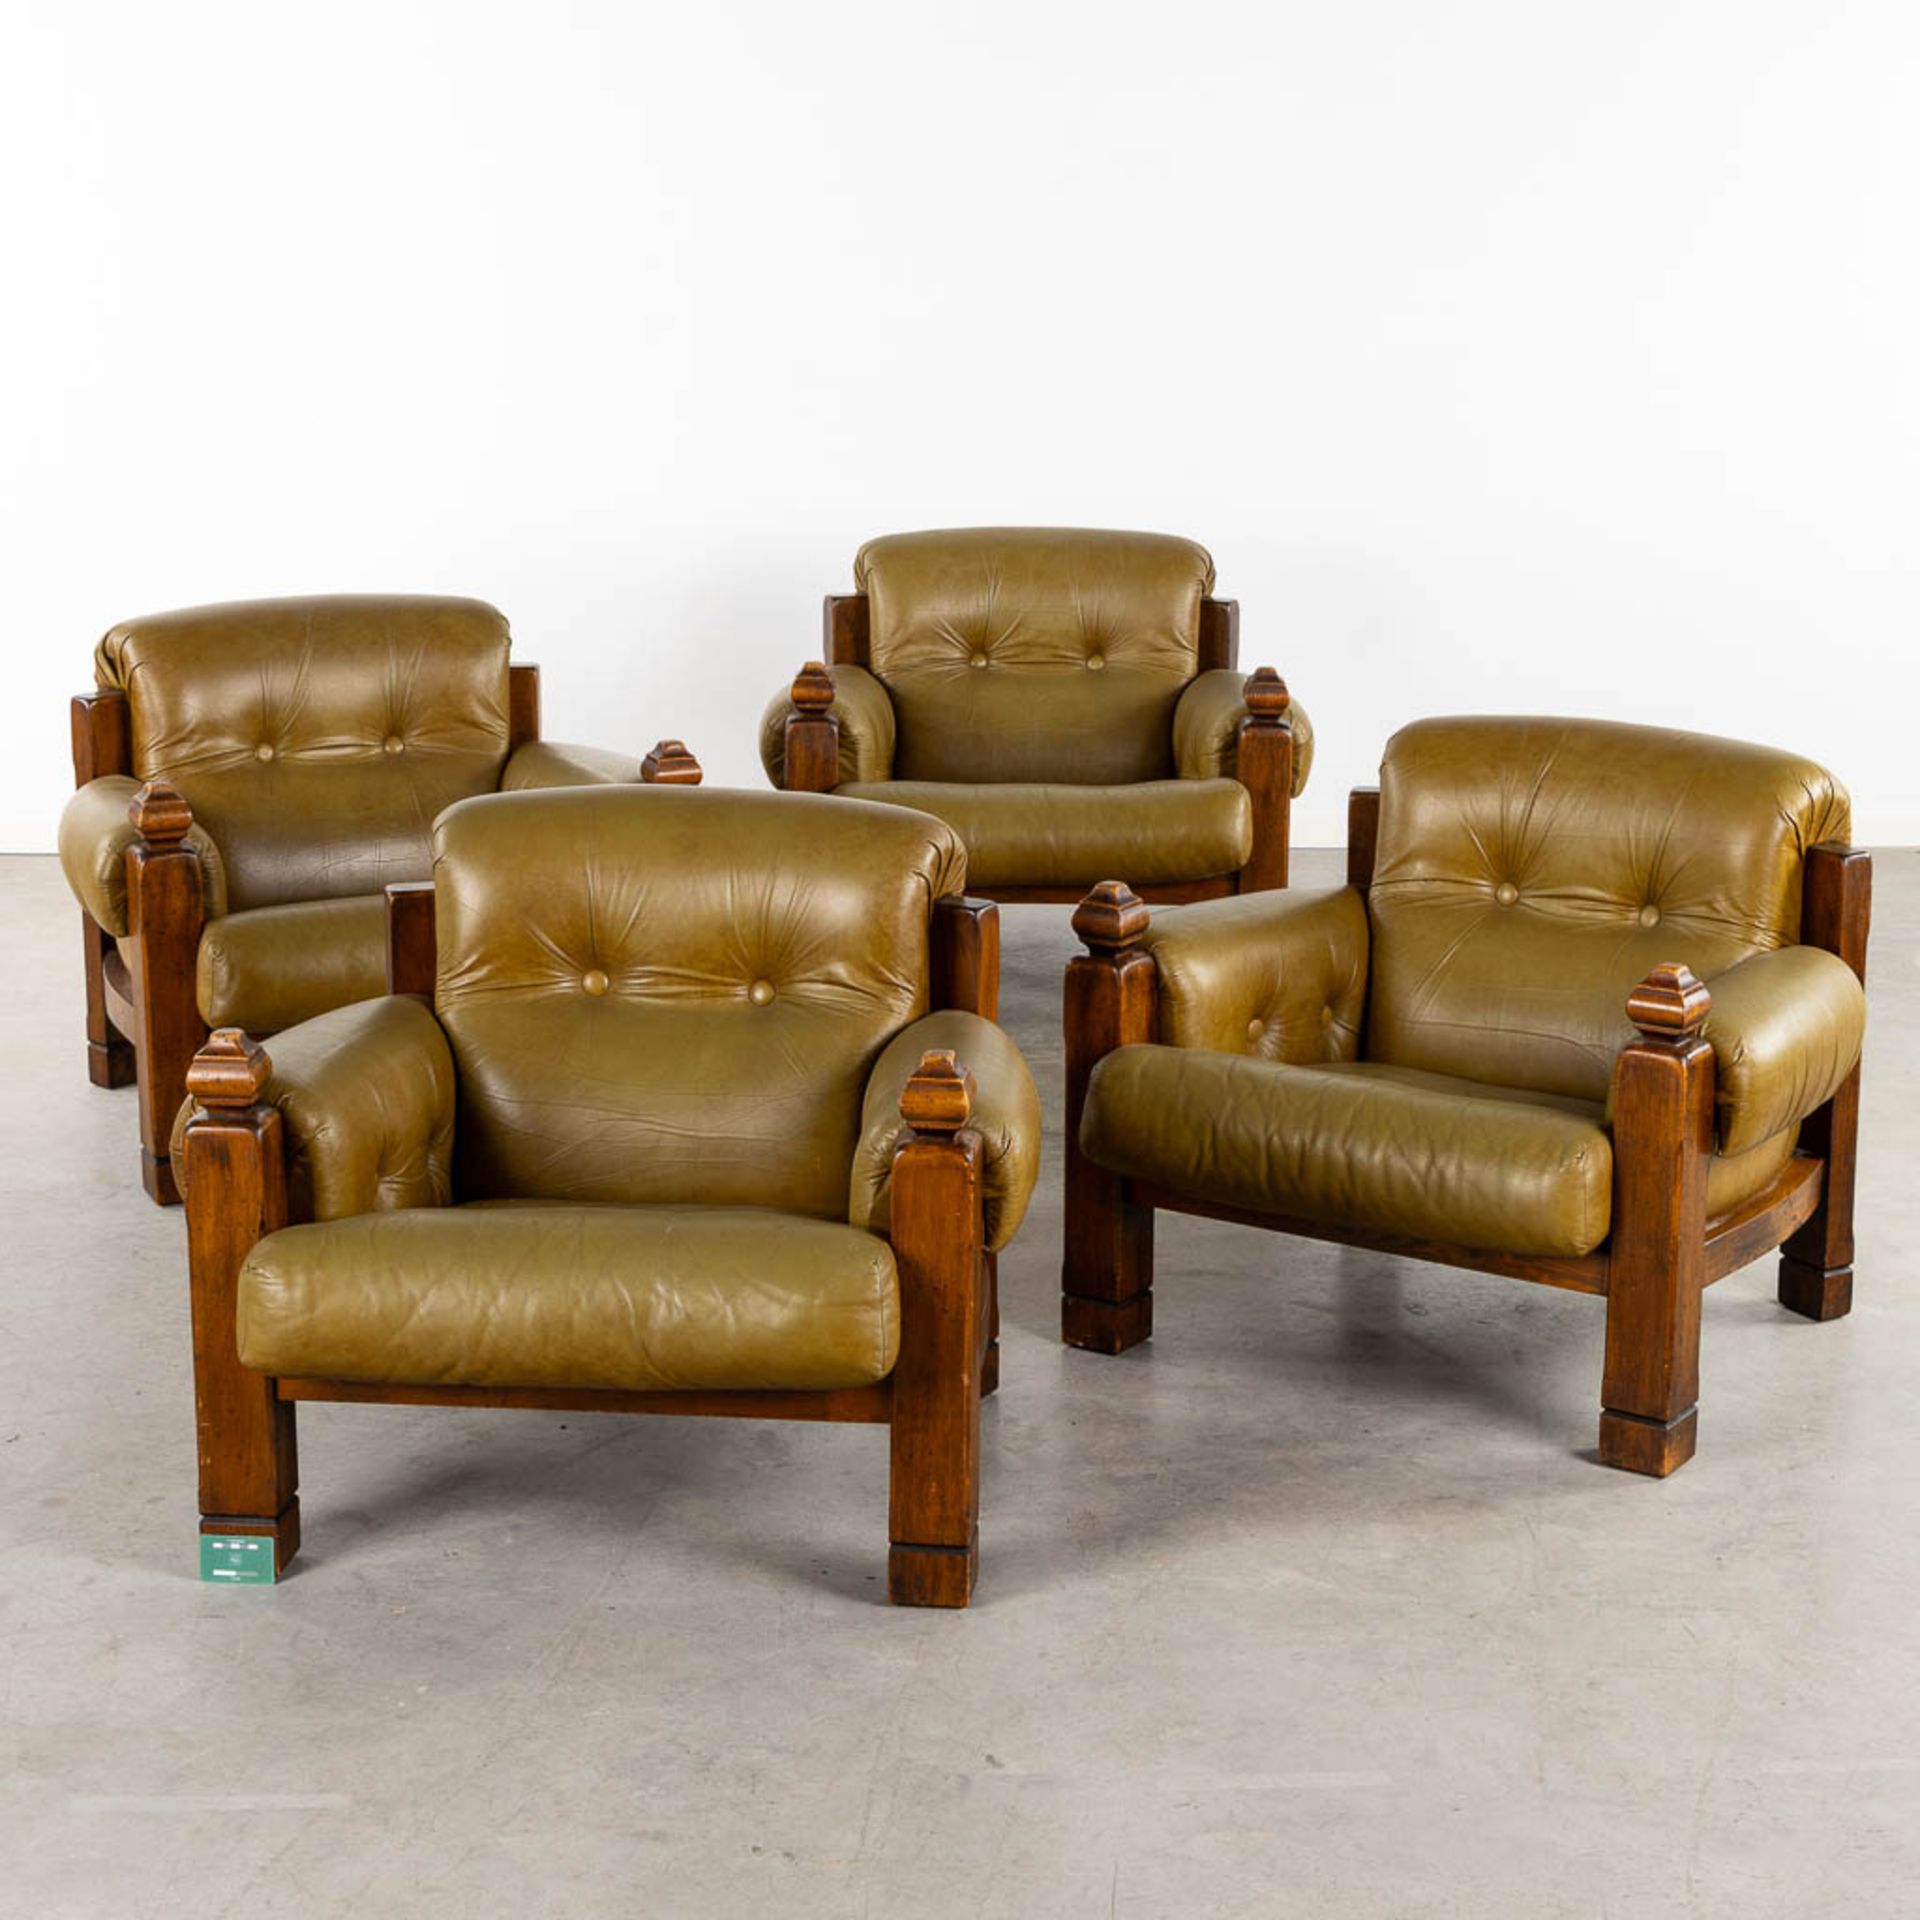 Four identical leather and wood lounge chairs, Circa 1960. (L:94 x W:96 x H:78 cm) - Image 2 of 10